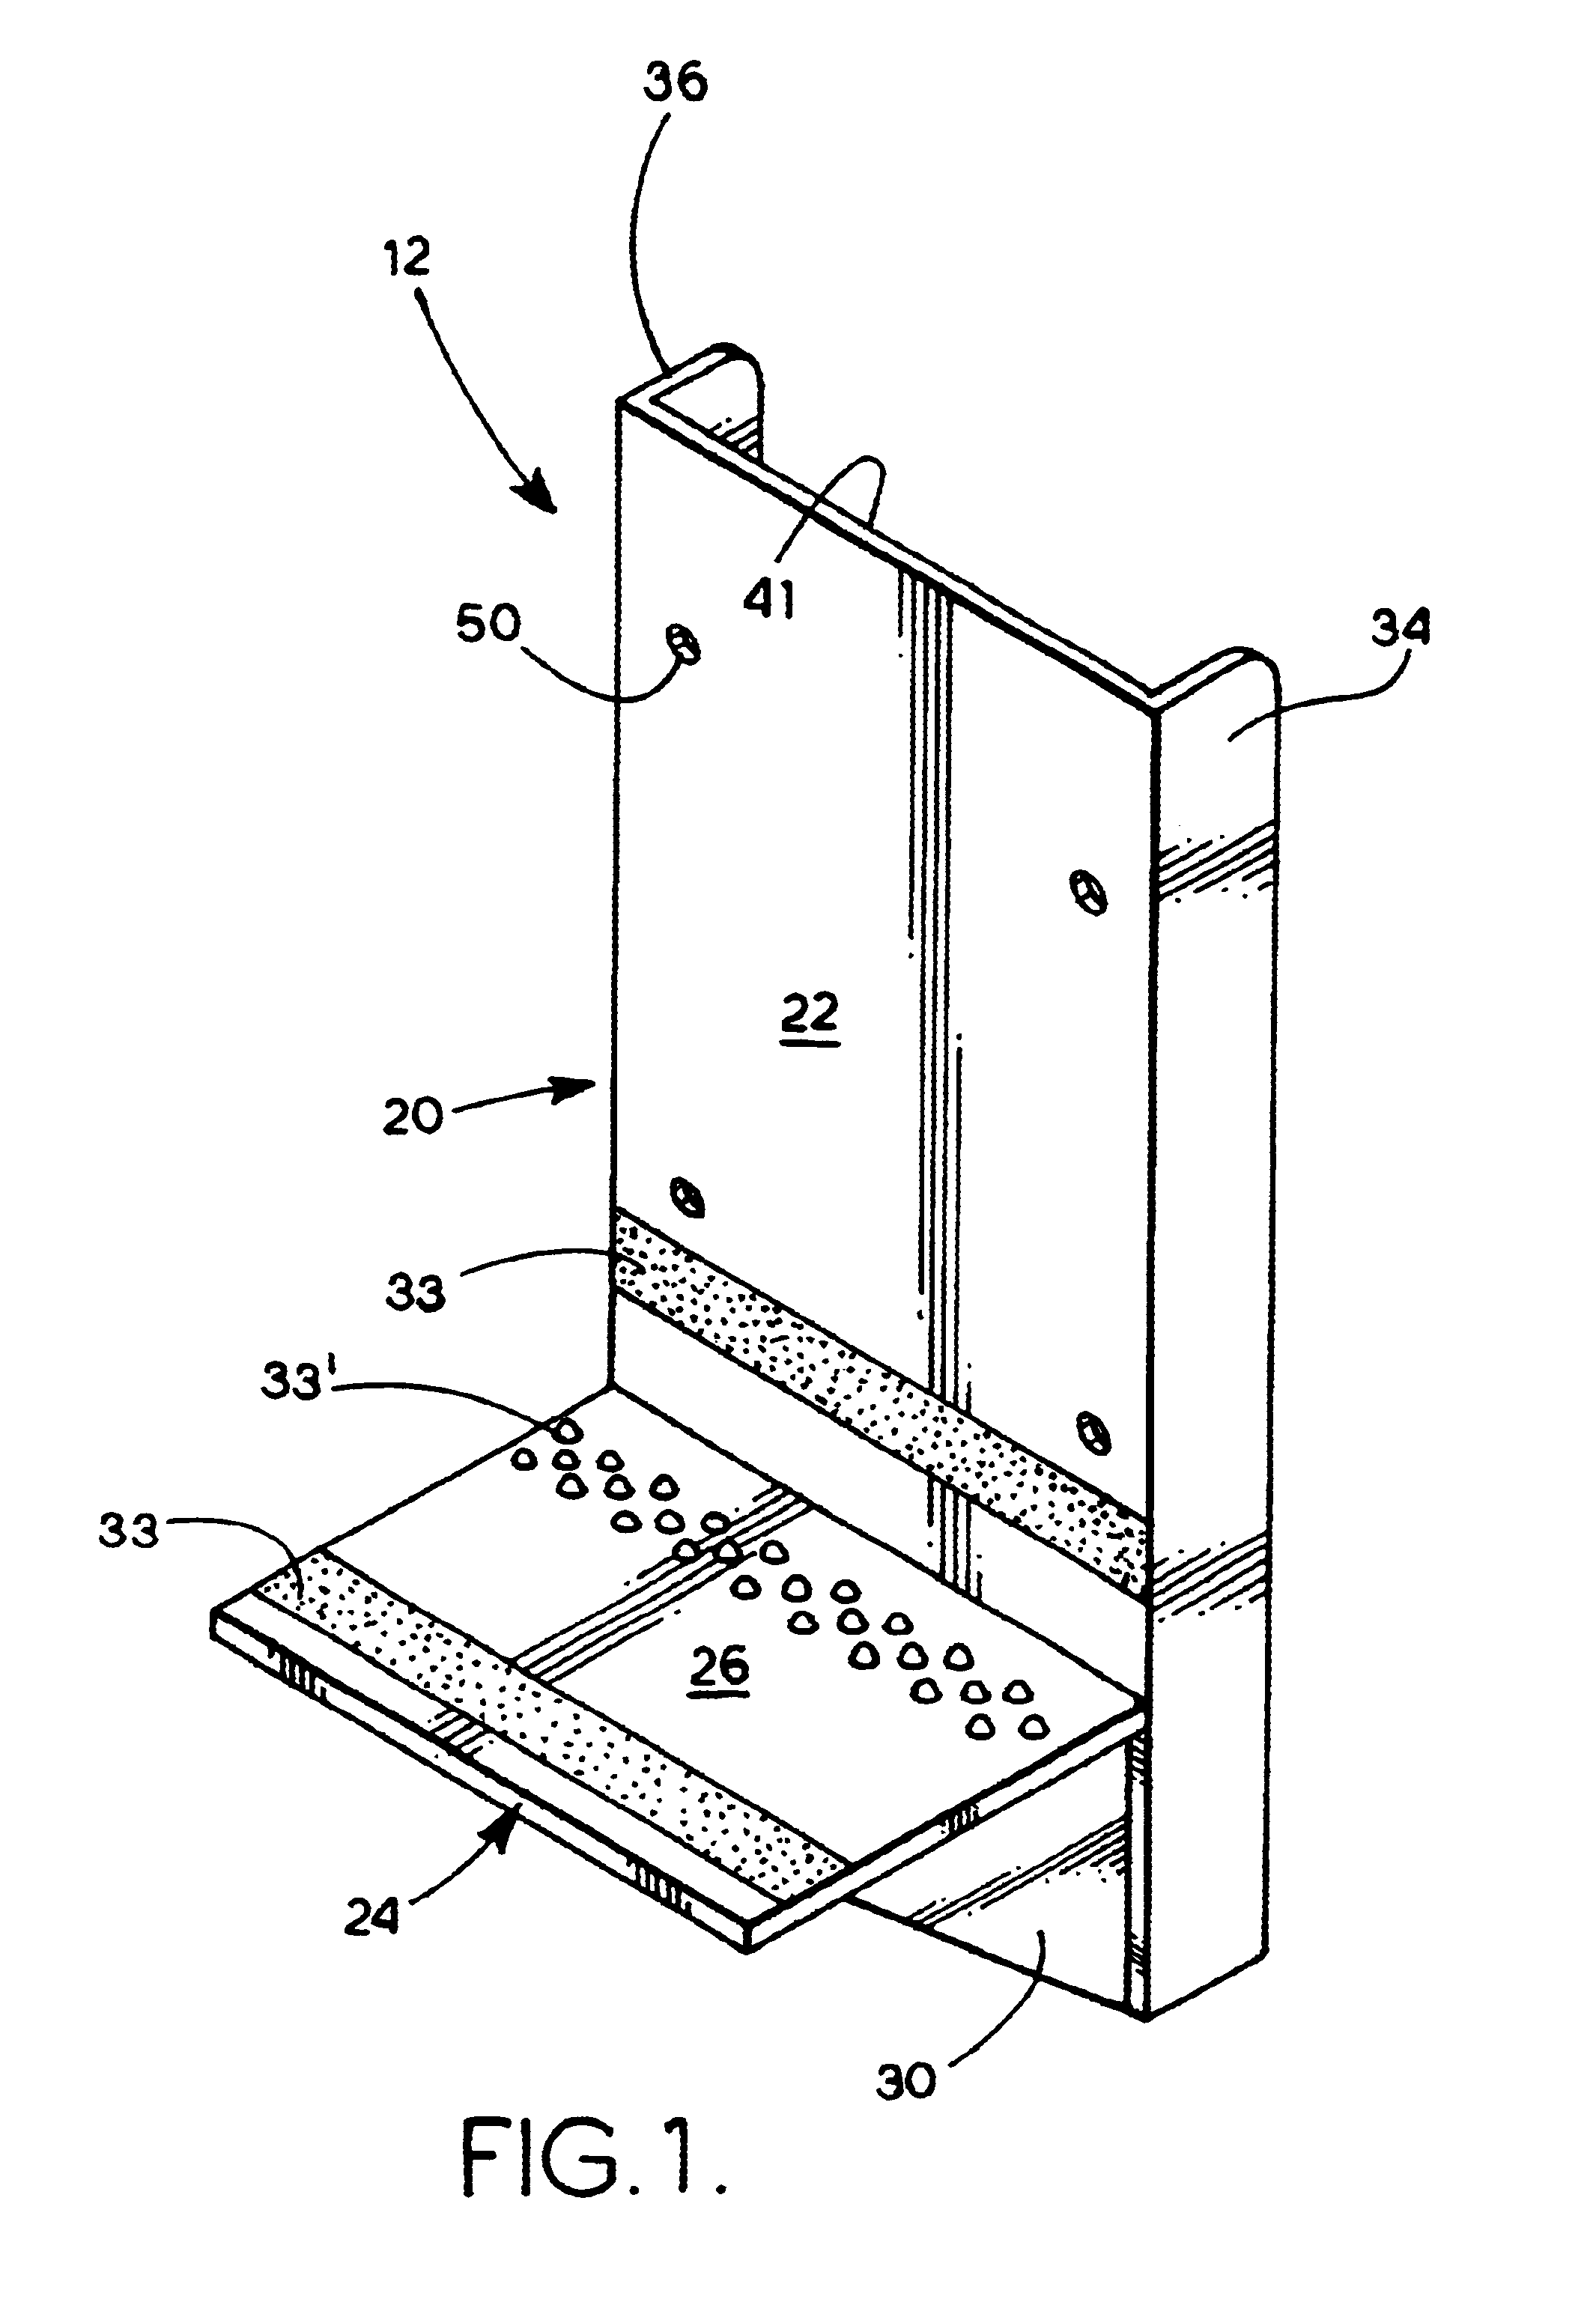 Structure jacking system and method